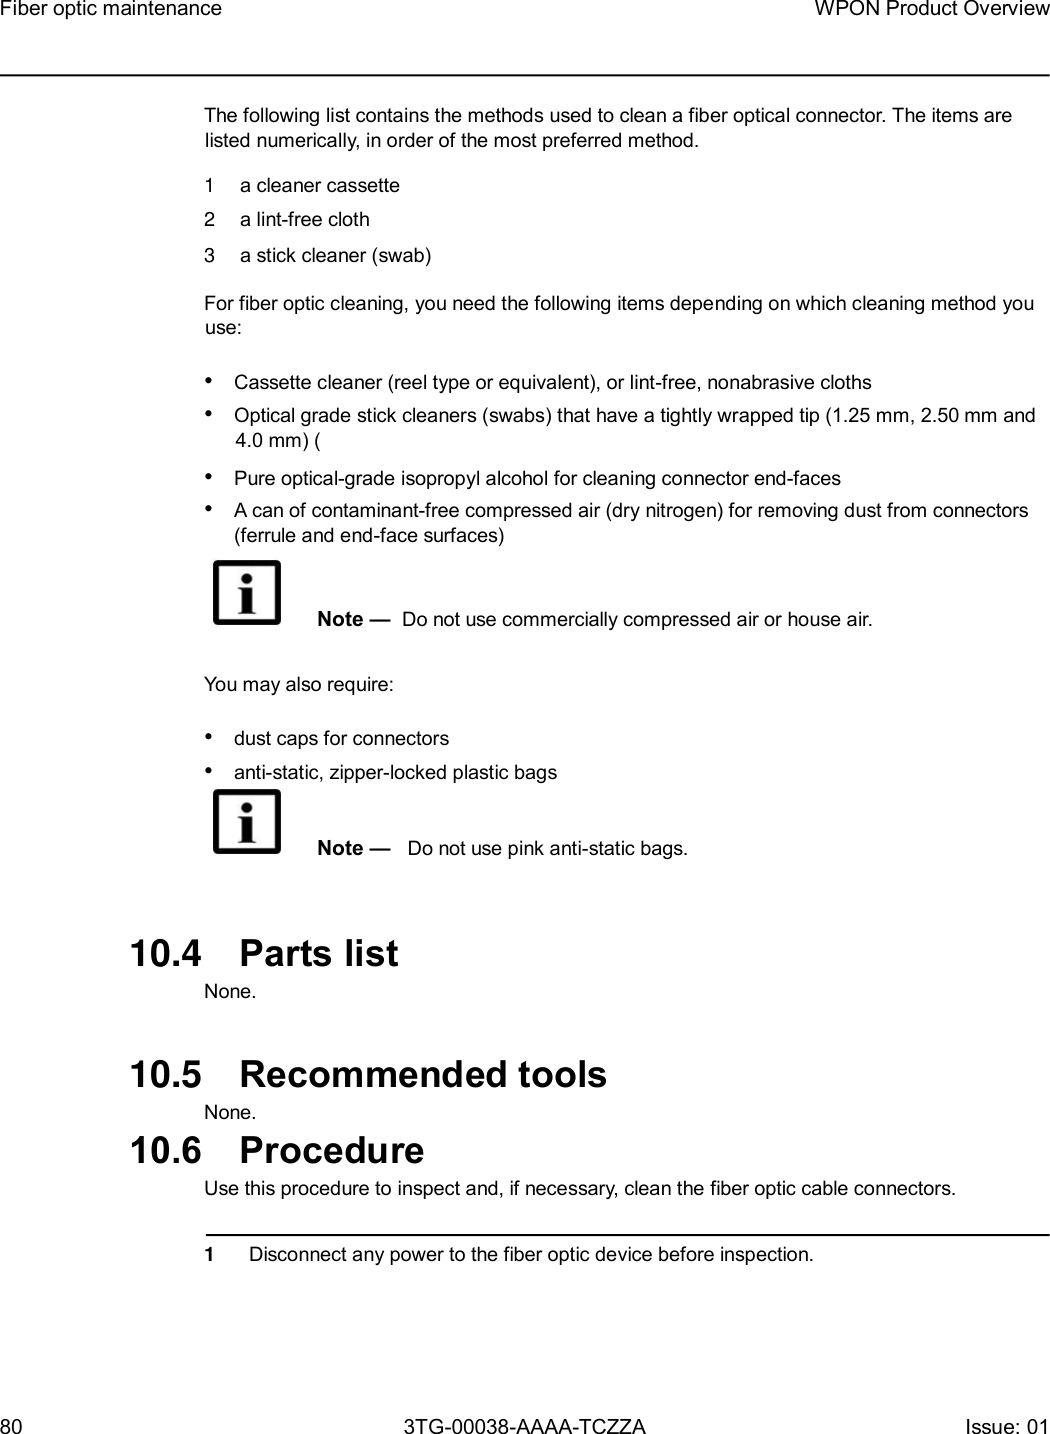 Page 80 of Nokia Bell 7577WPONAPED WPON User Manual WPON Product Overview